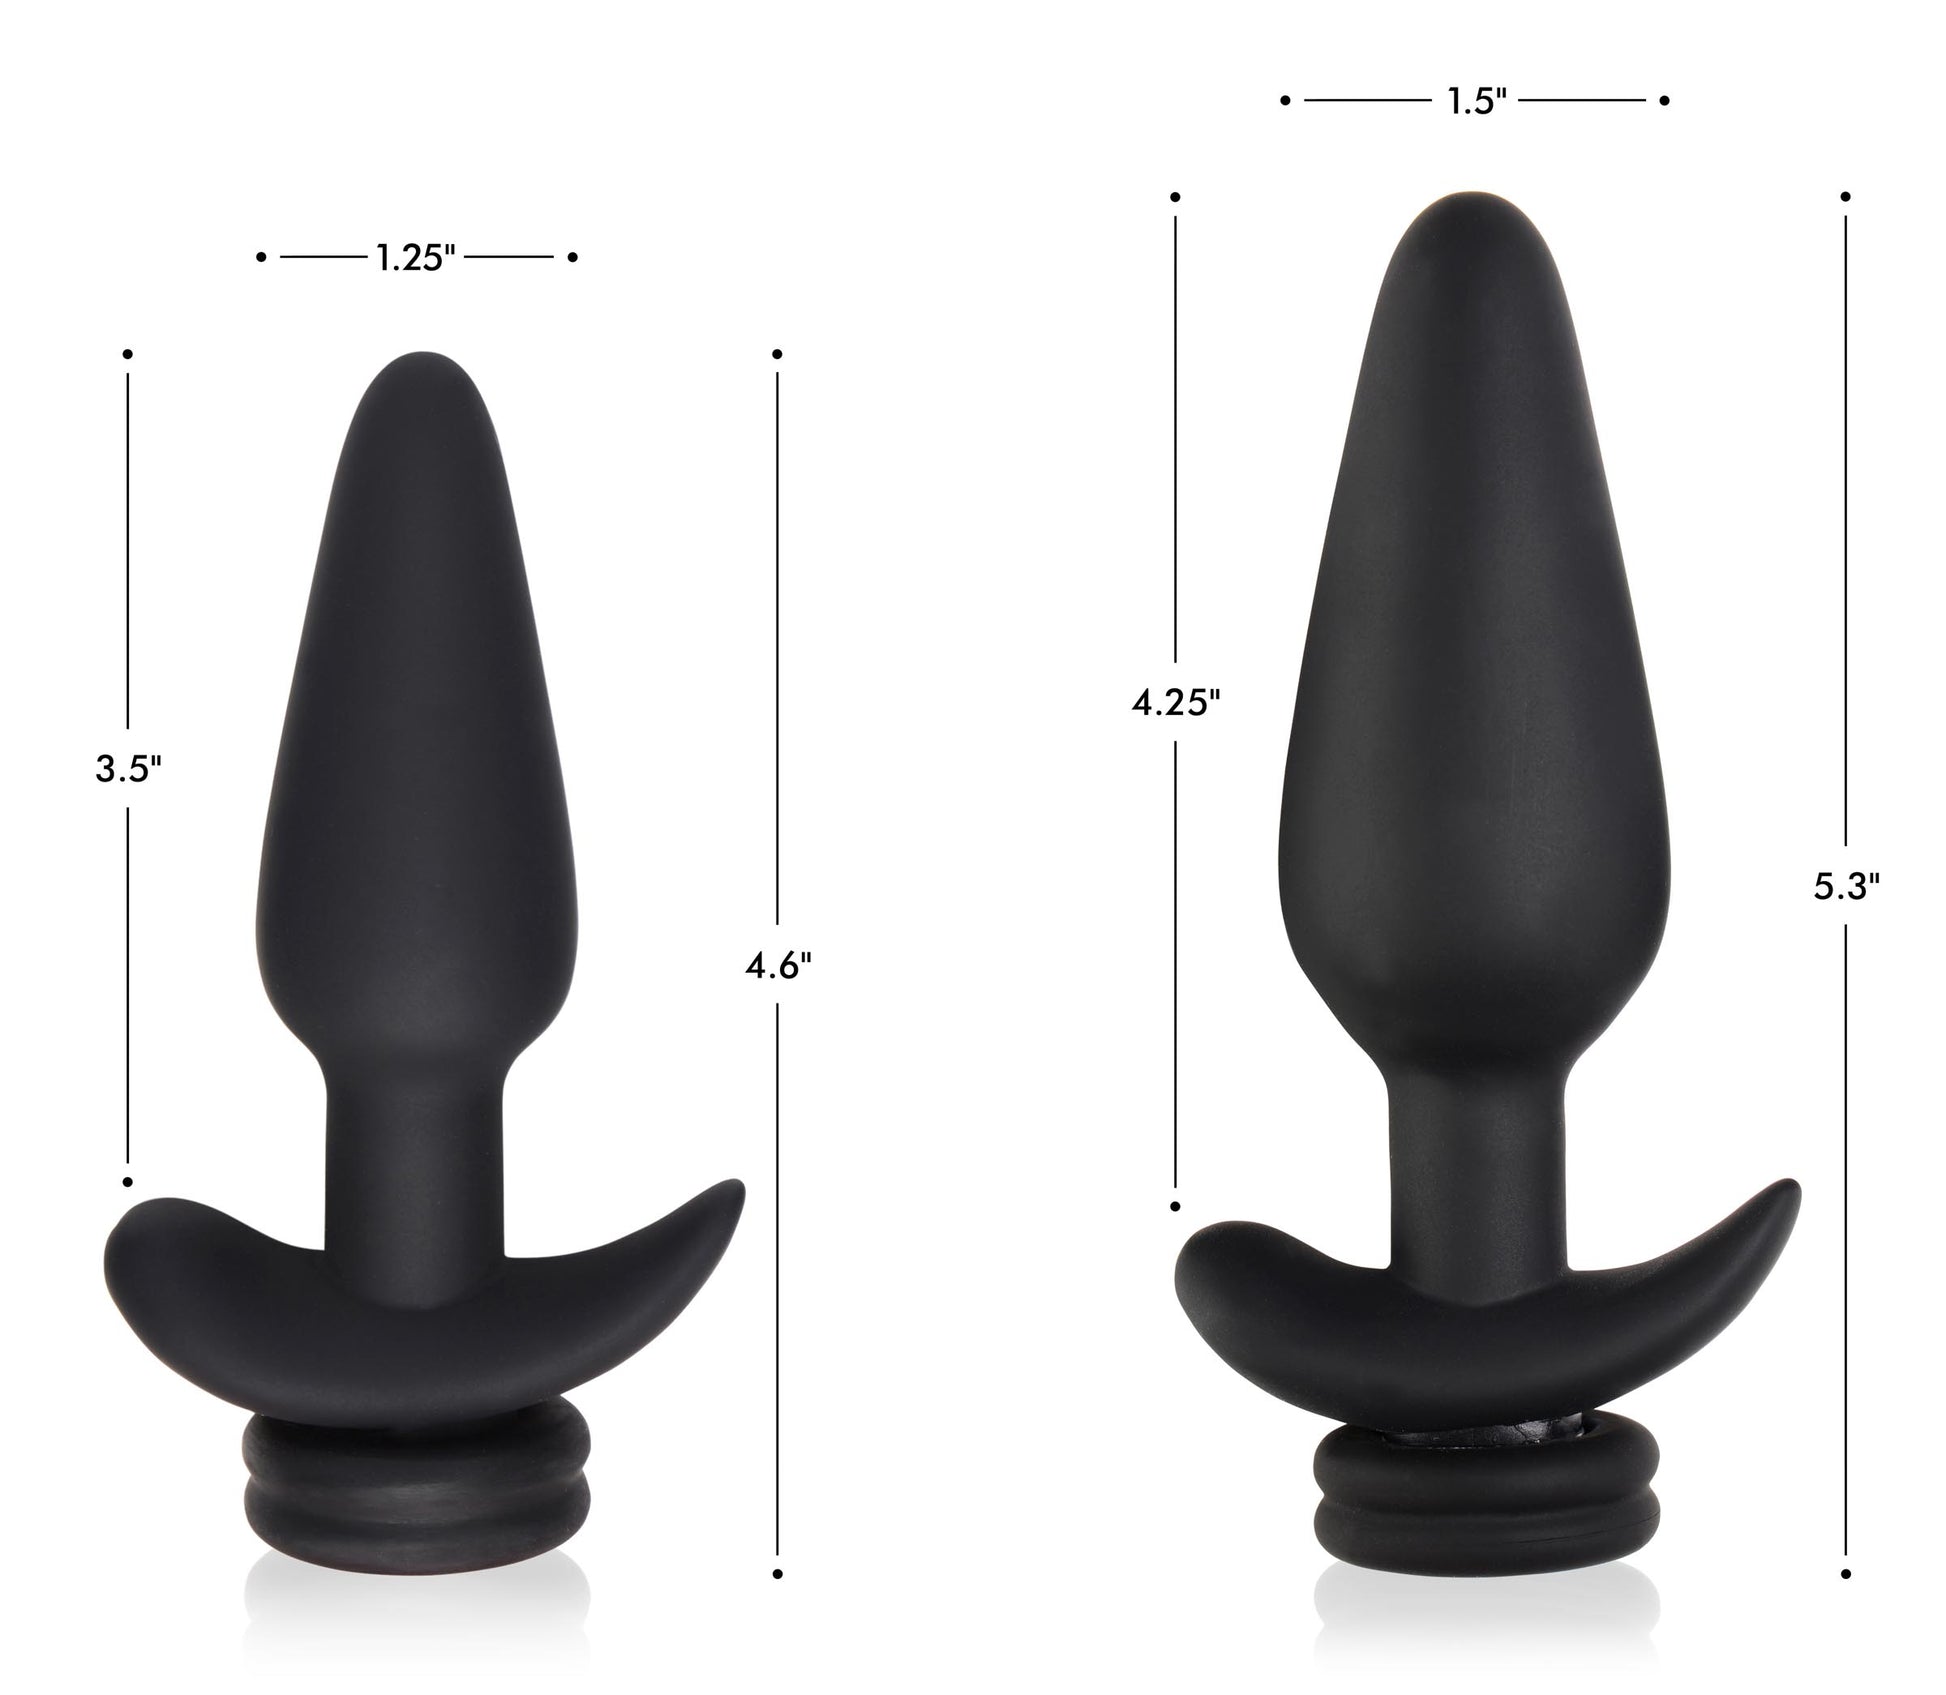 Large Vibrating Anal Plug with Interchangeable Fox Tail - White - UABDSM